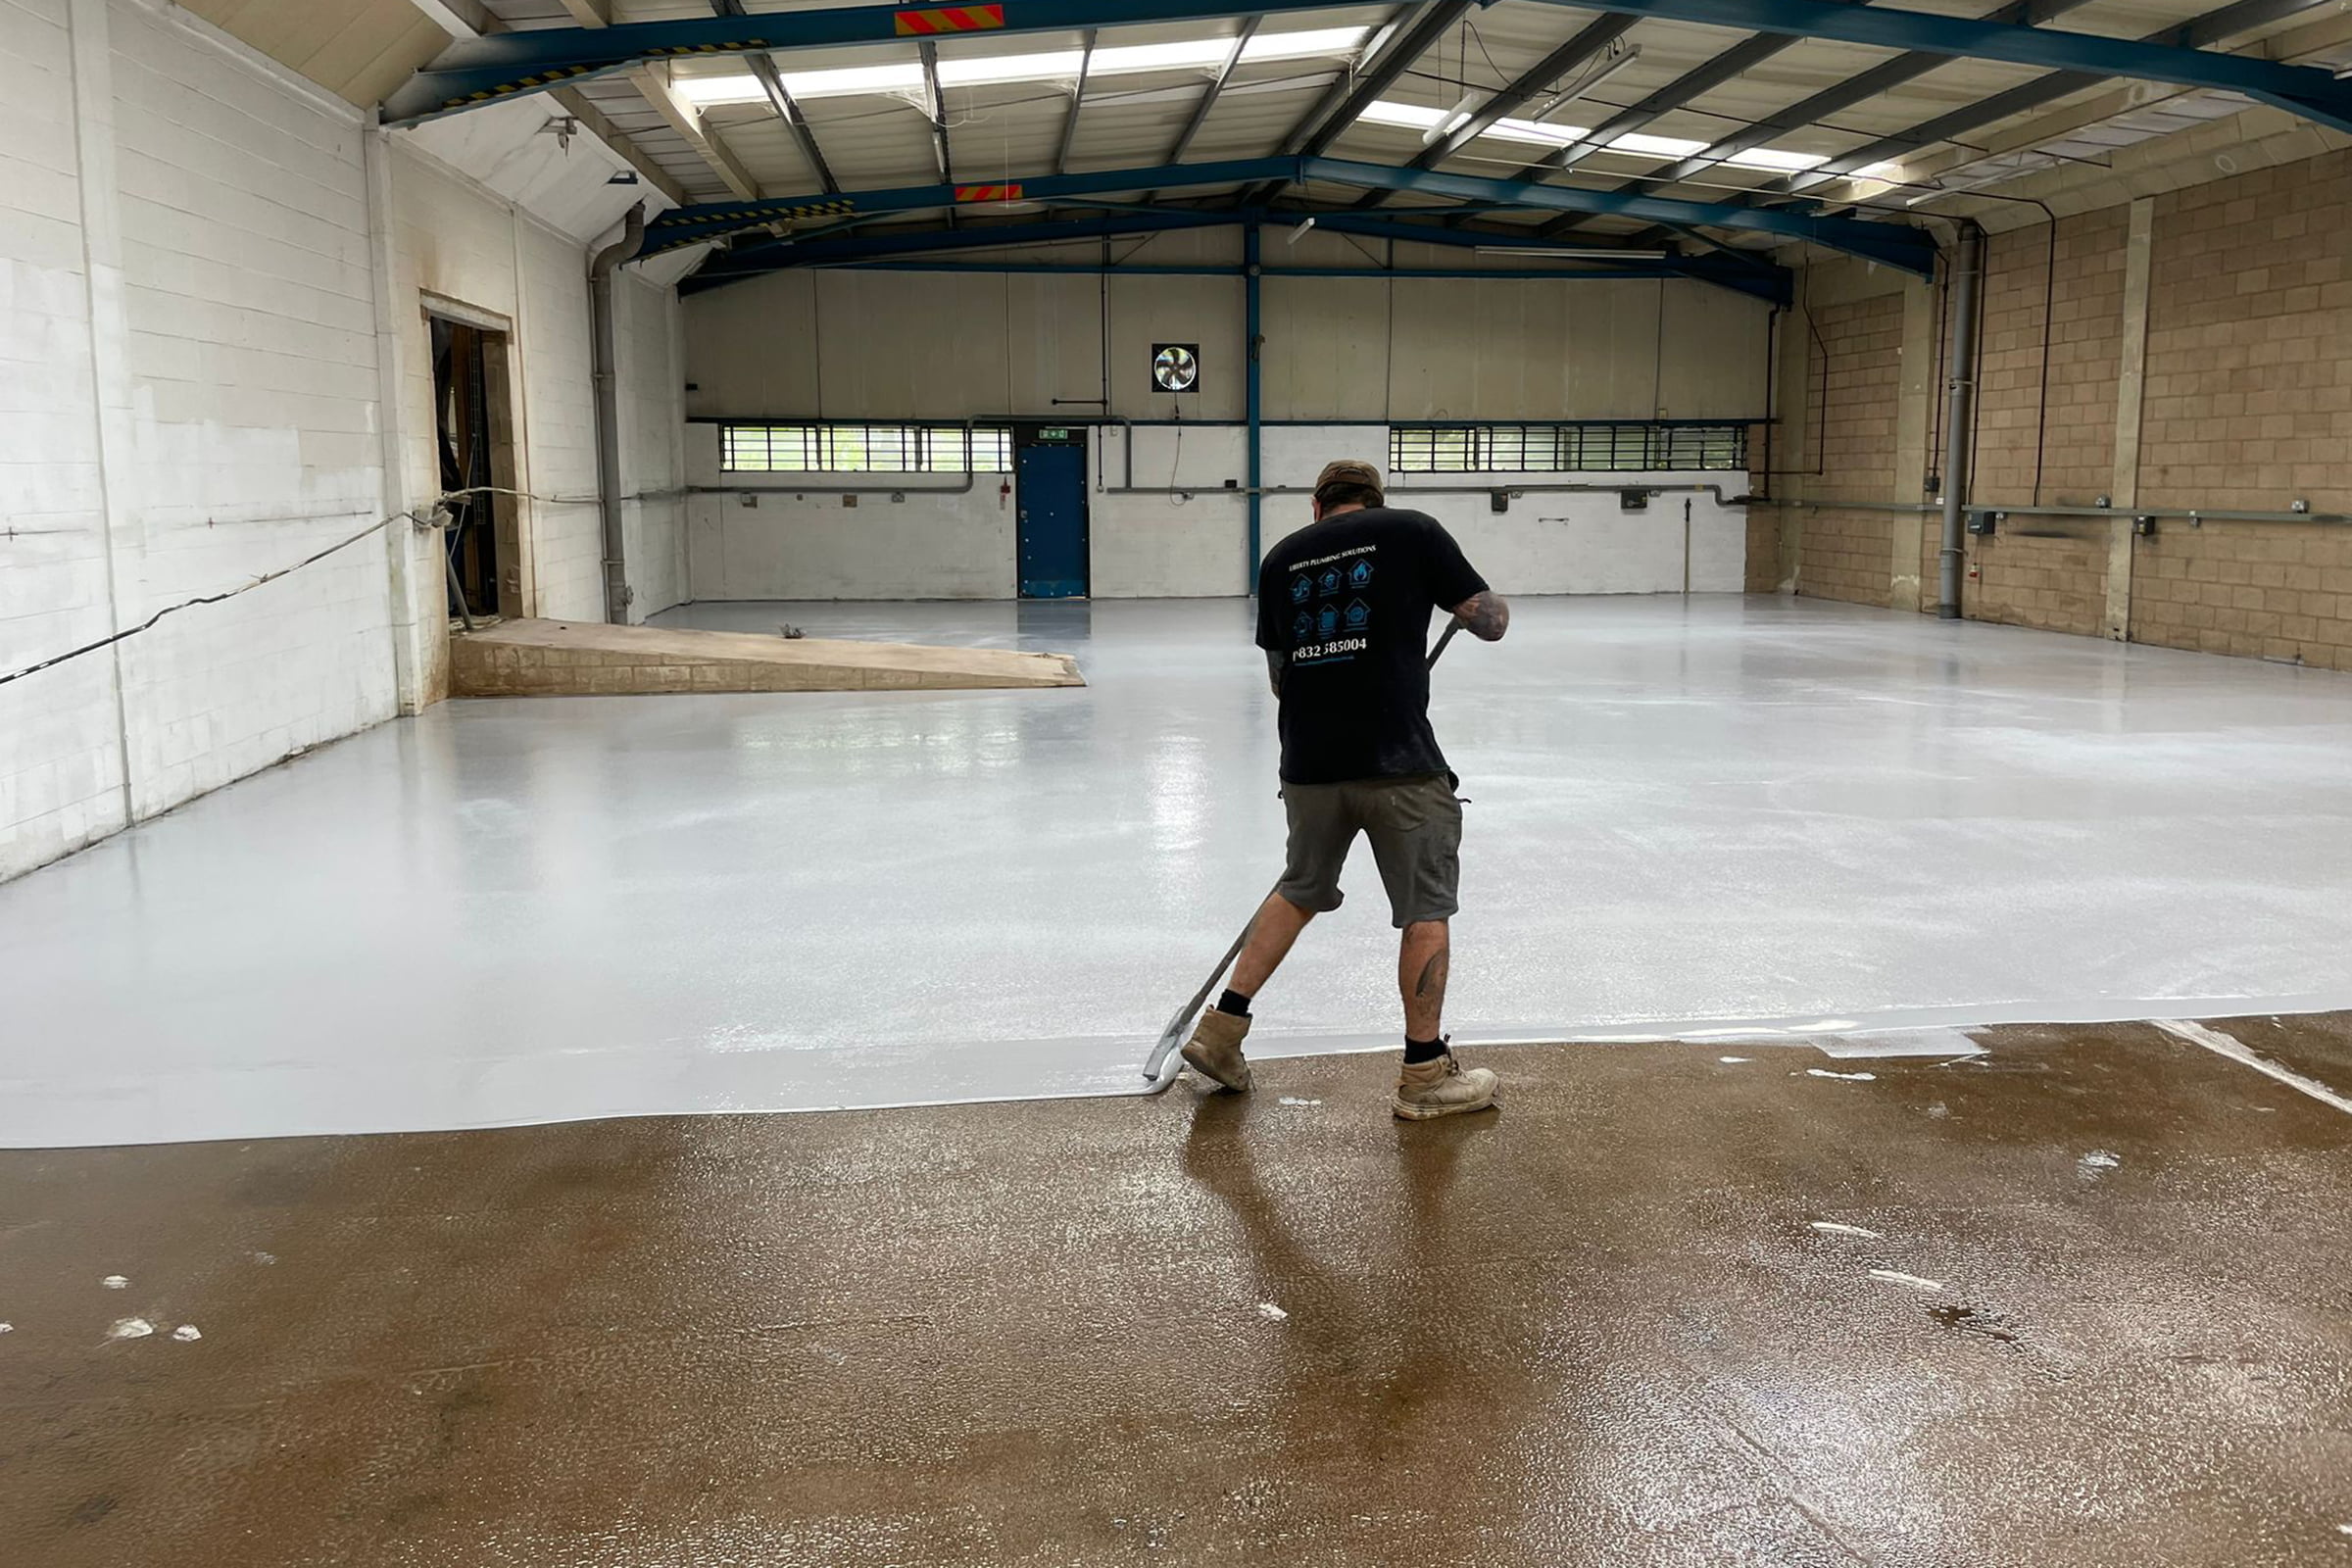 Epoxy resin floor being installed in a warehouse